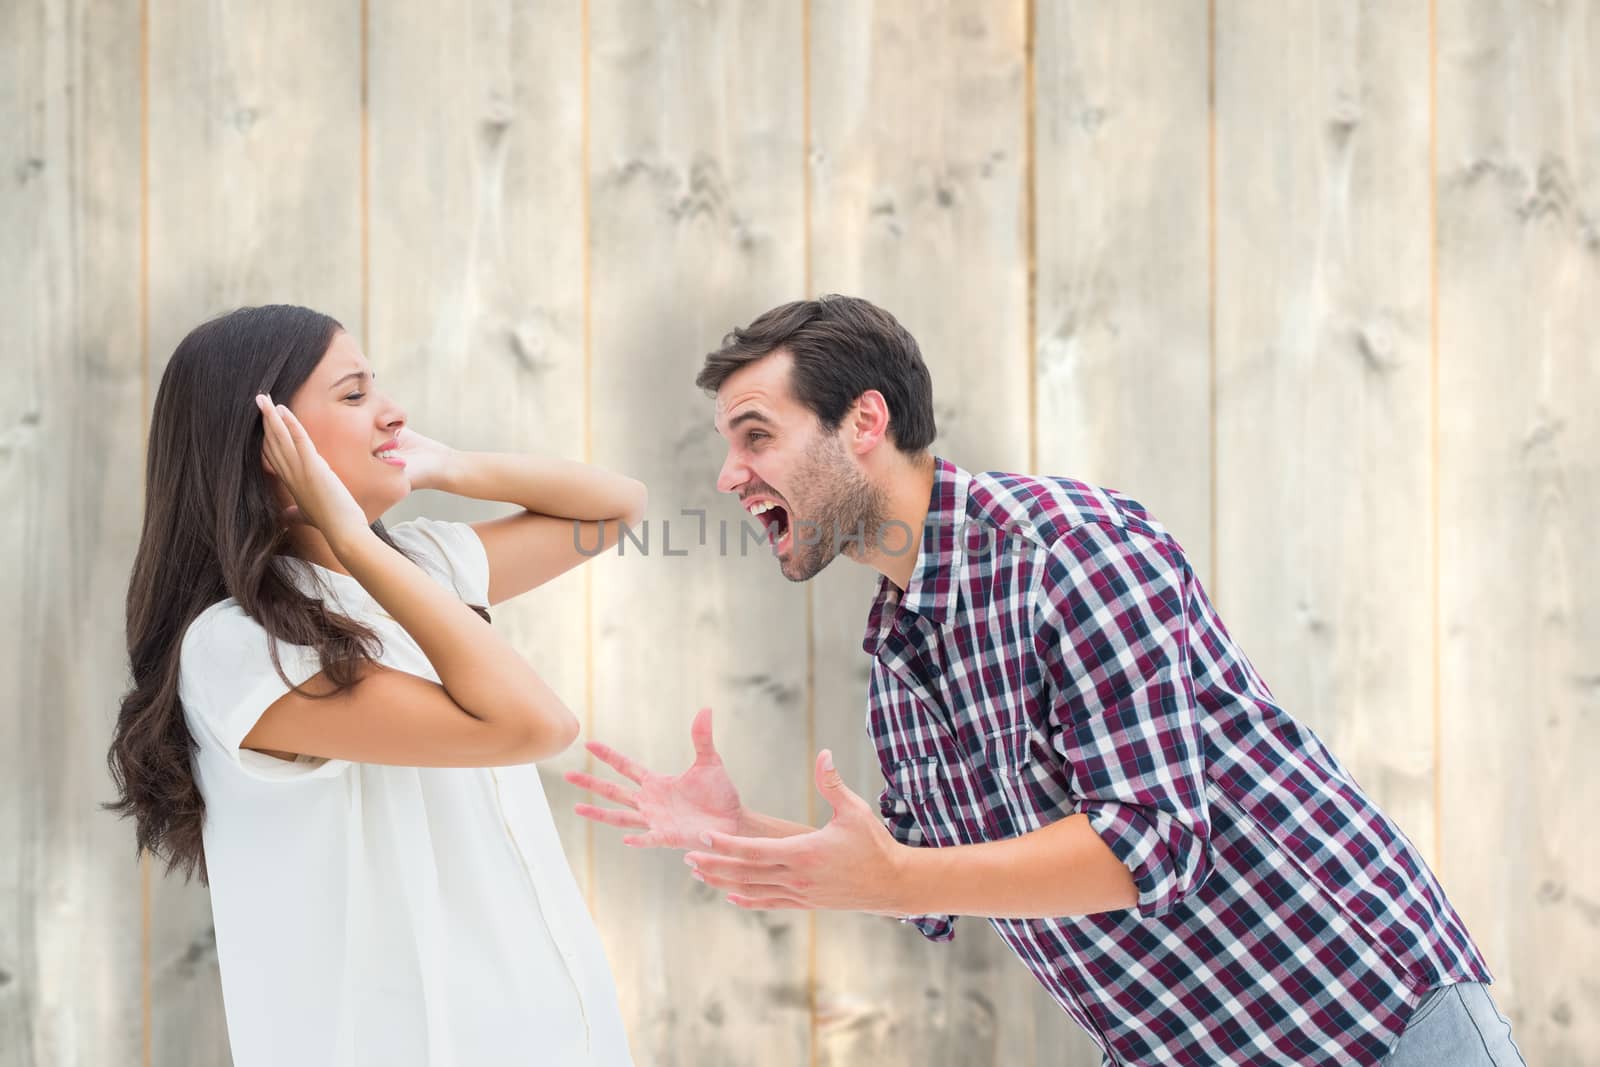 Fearful brunette being overpowered by boyfriend against pale wooden planks